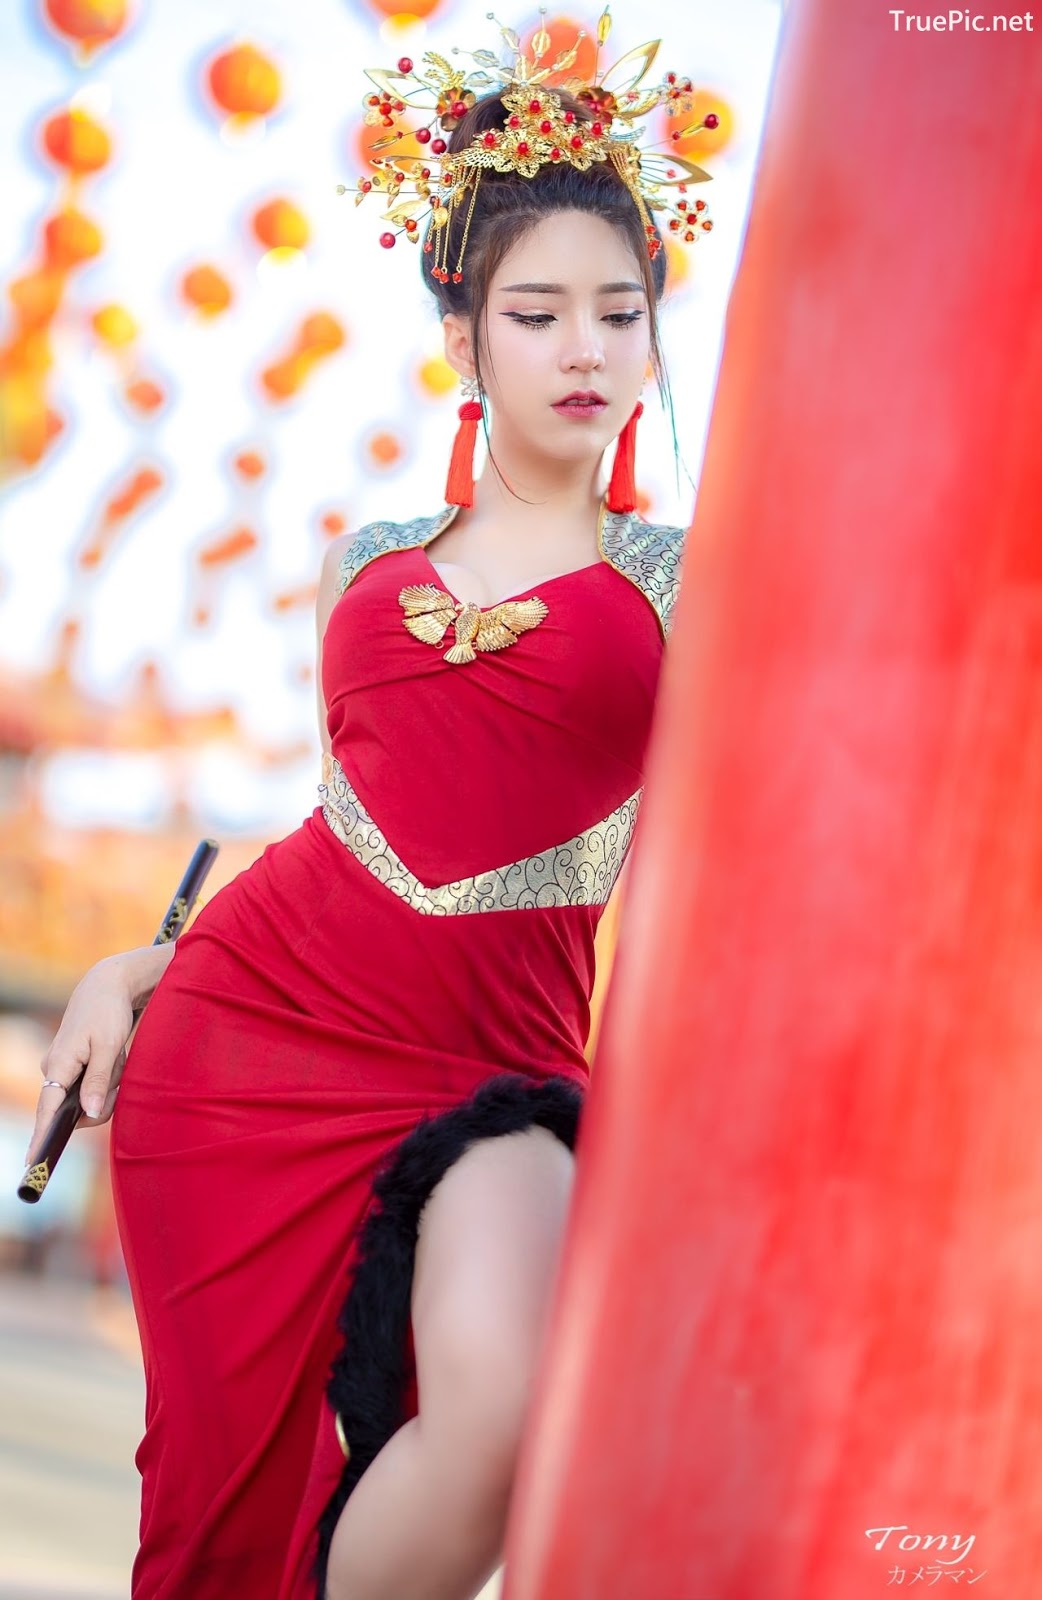 Image-Thailand-Hot-Model-Janet-Kanokwan-Saesim-Sexy-Chinese-Girl-Red-Dress-Traditional-TruePic.net- Picture-27